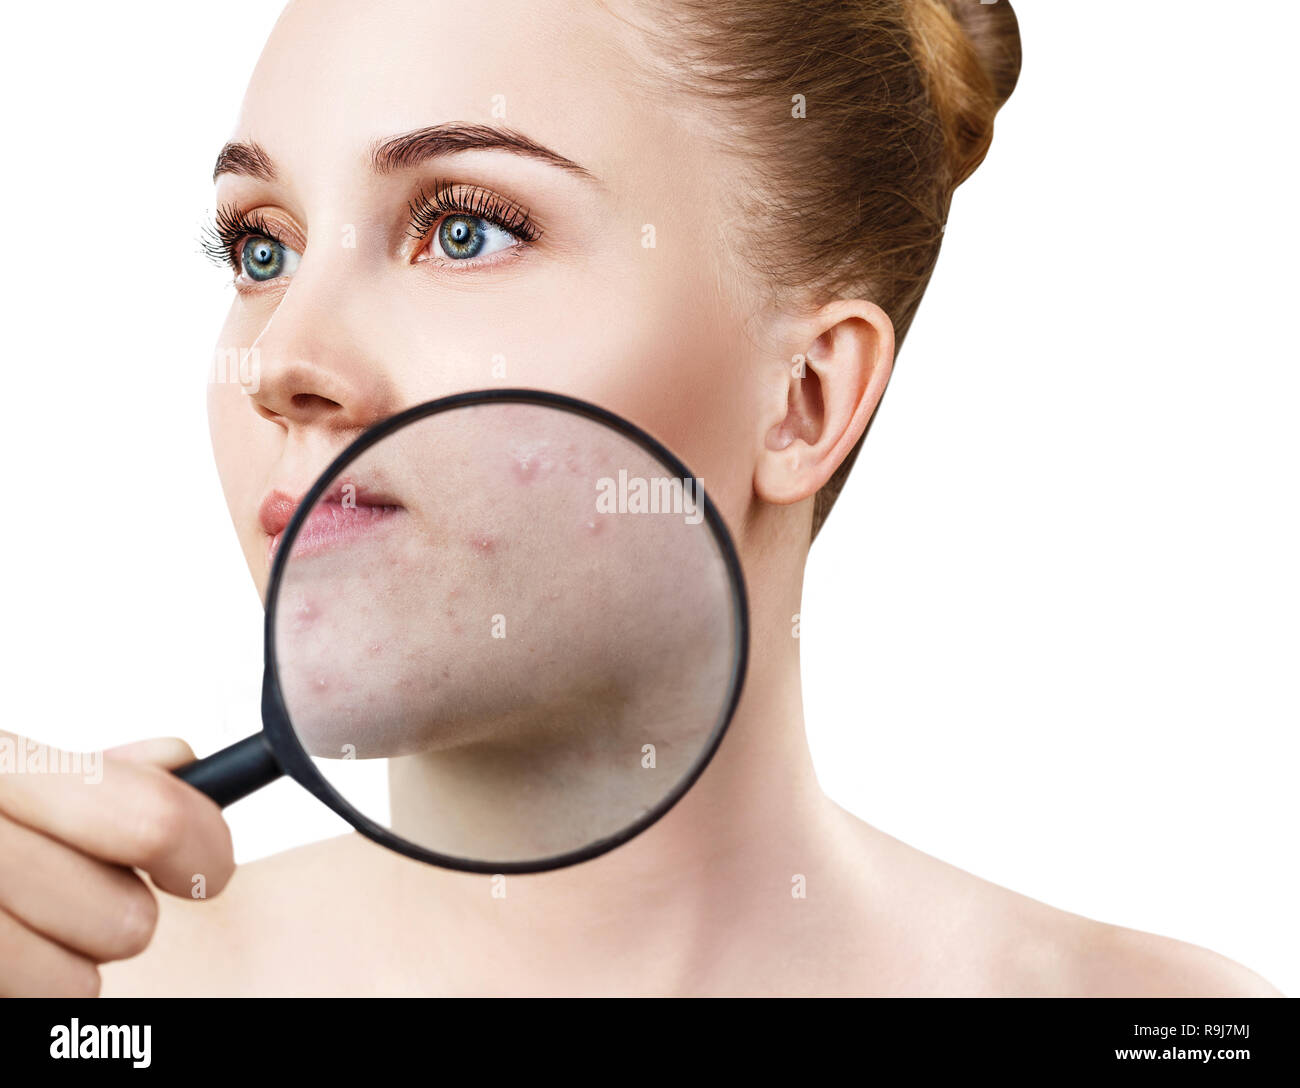 Young woman with magnifying glass shows skin with acne. Stock Photo